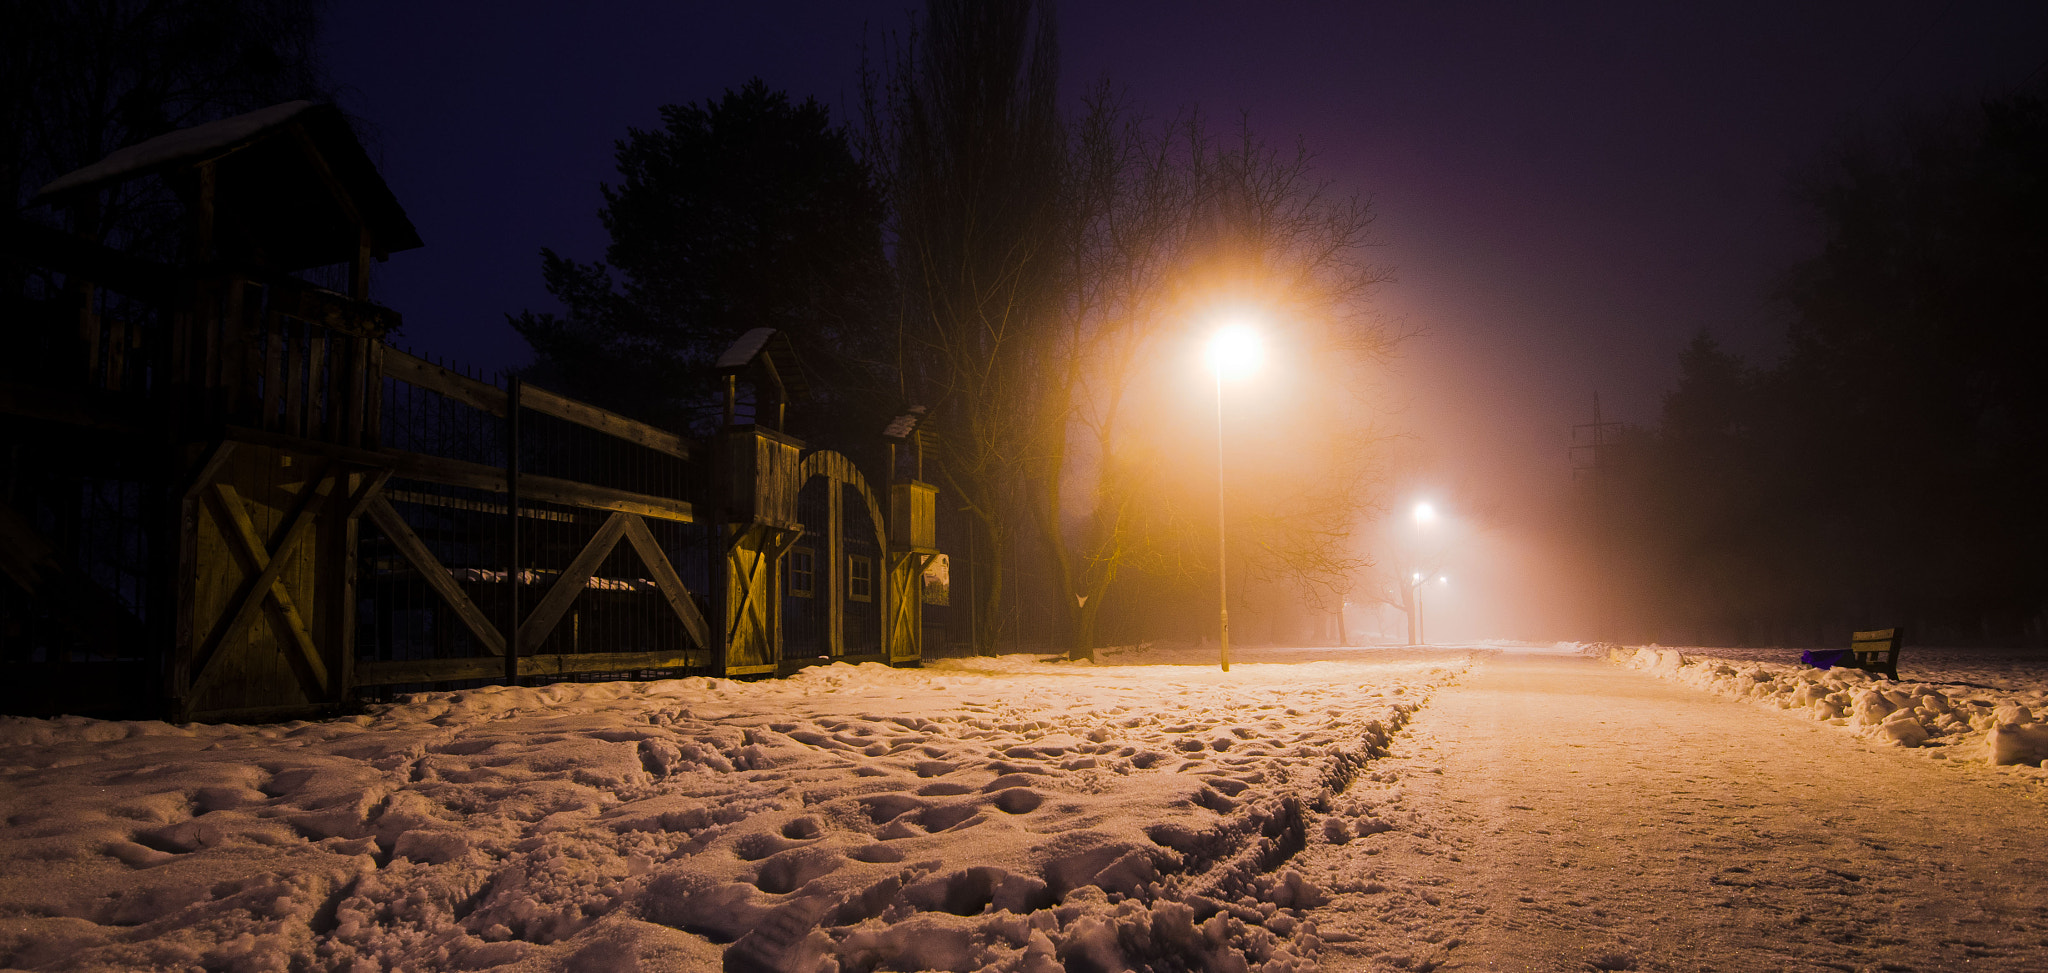 Nikon D7000 + Tokina AT-X 11-20 F2.8 PRO DX (AF 11-20mm f/2.8) sample photo. Countryside nightscape photography